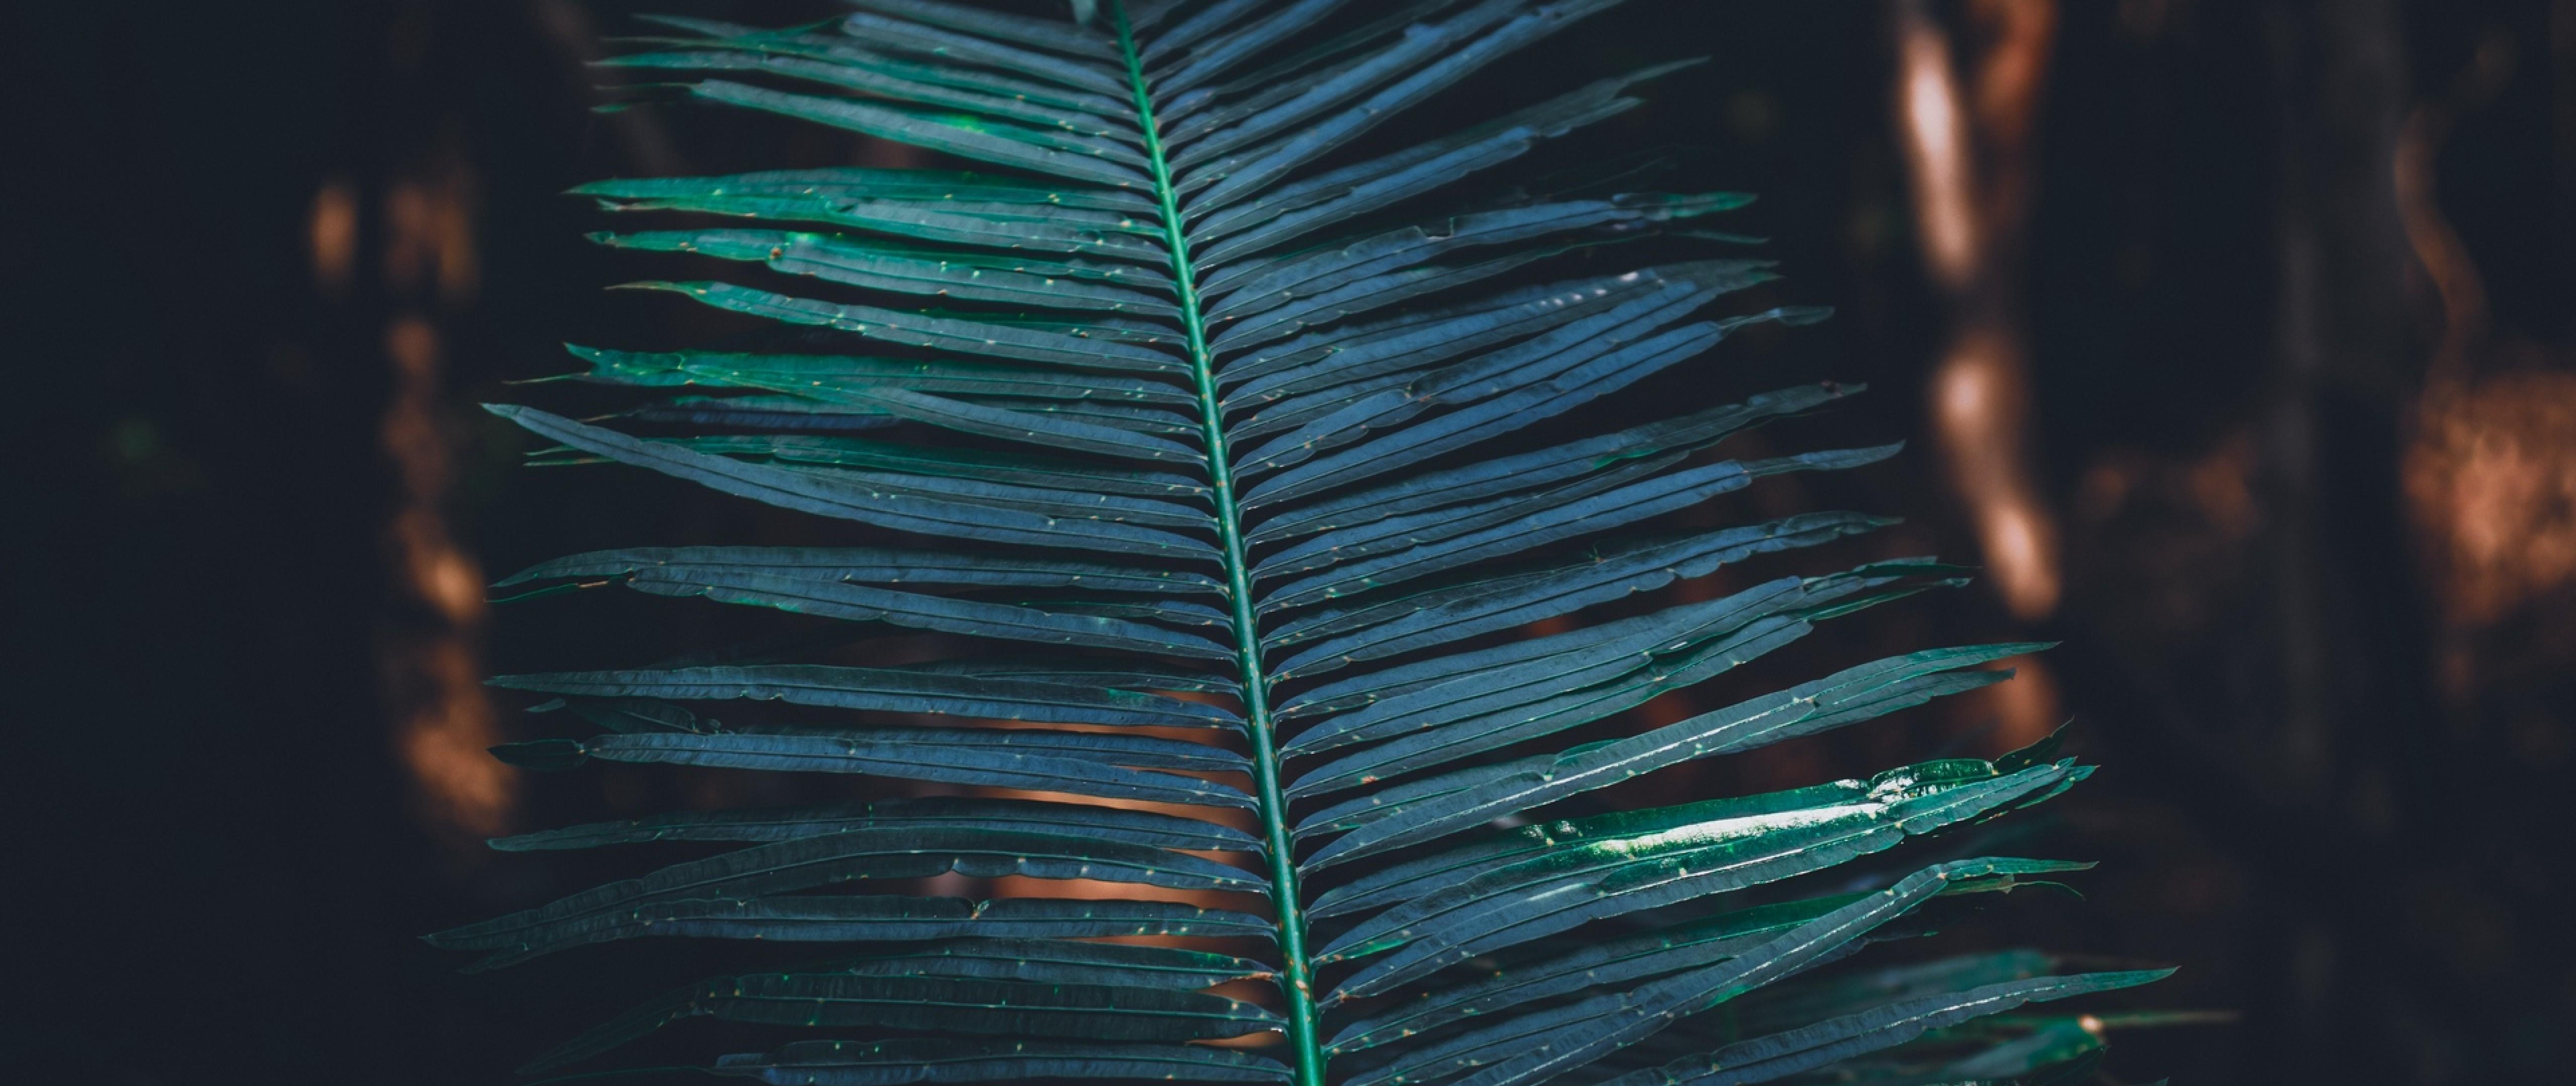 Carved Tropical Leaves HD Wallpaper 4k Ultra Wide Tv